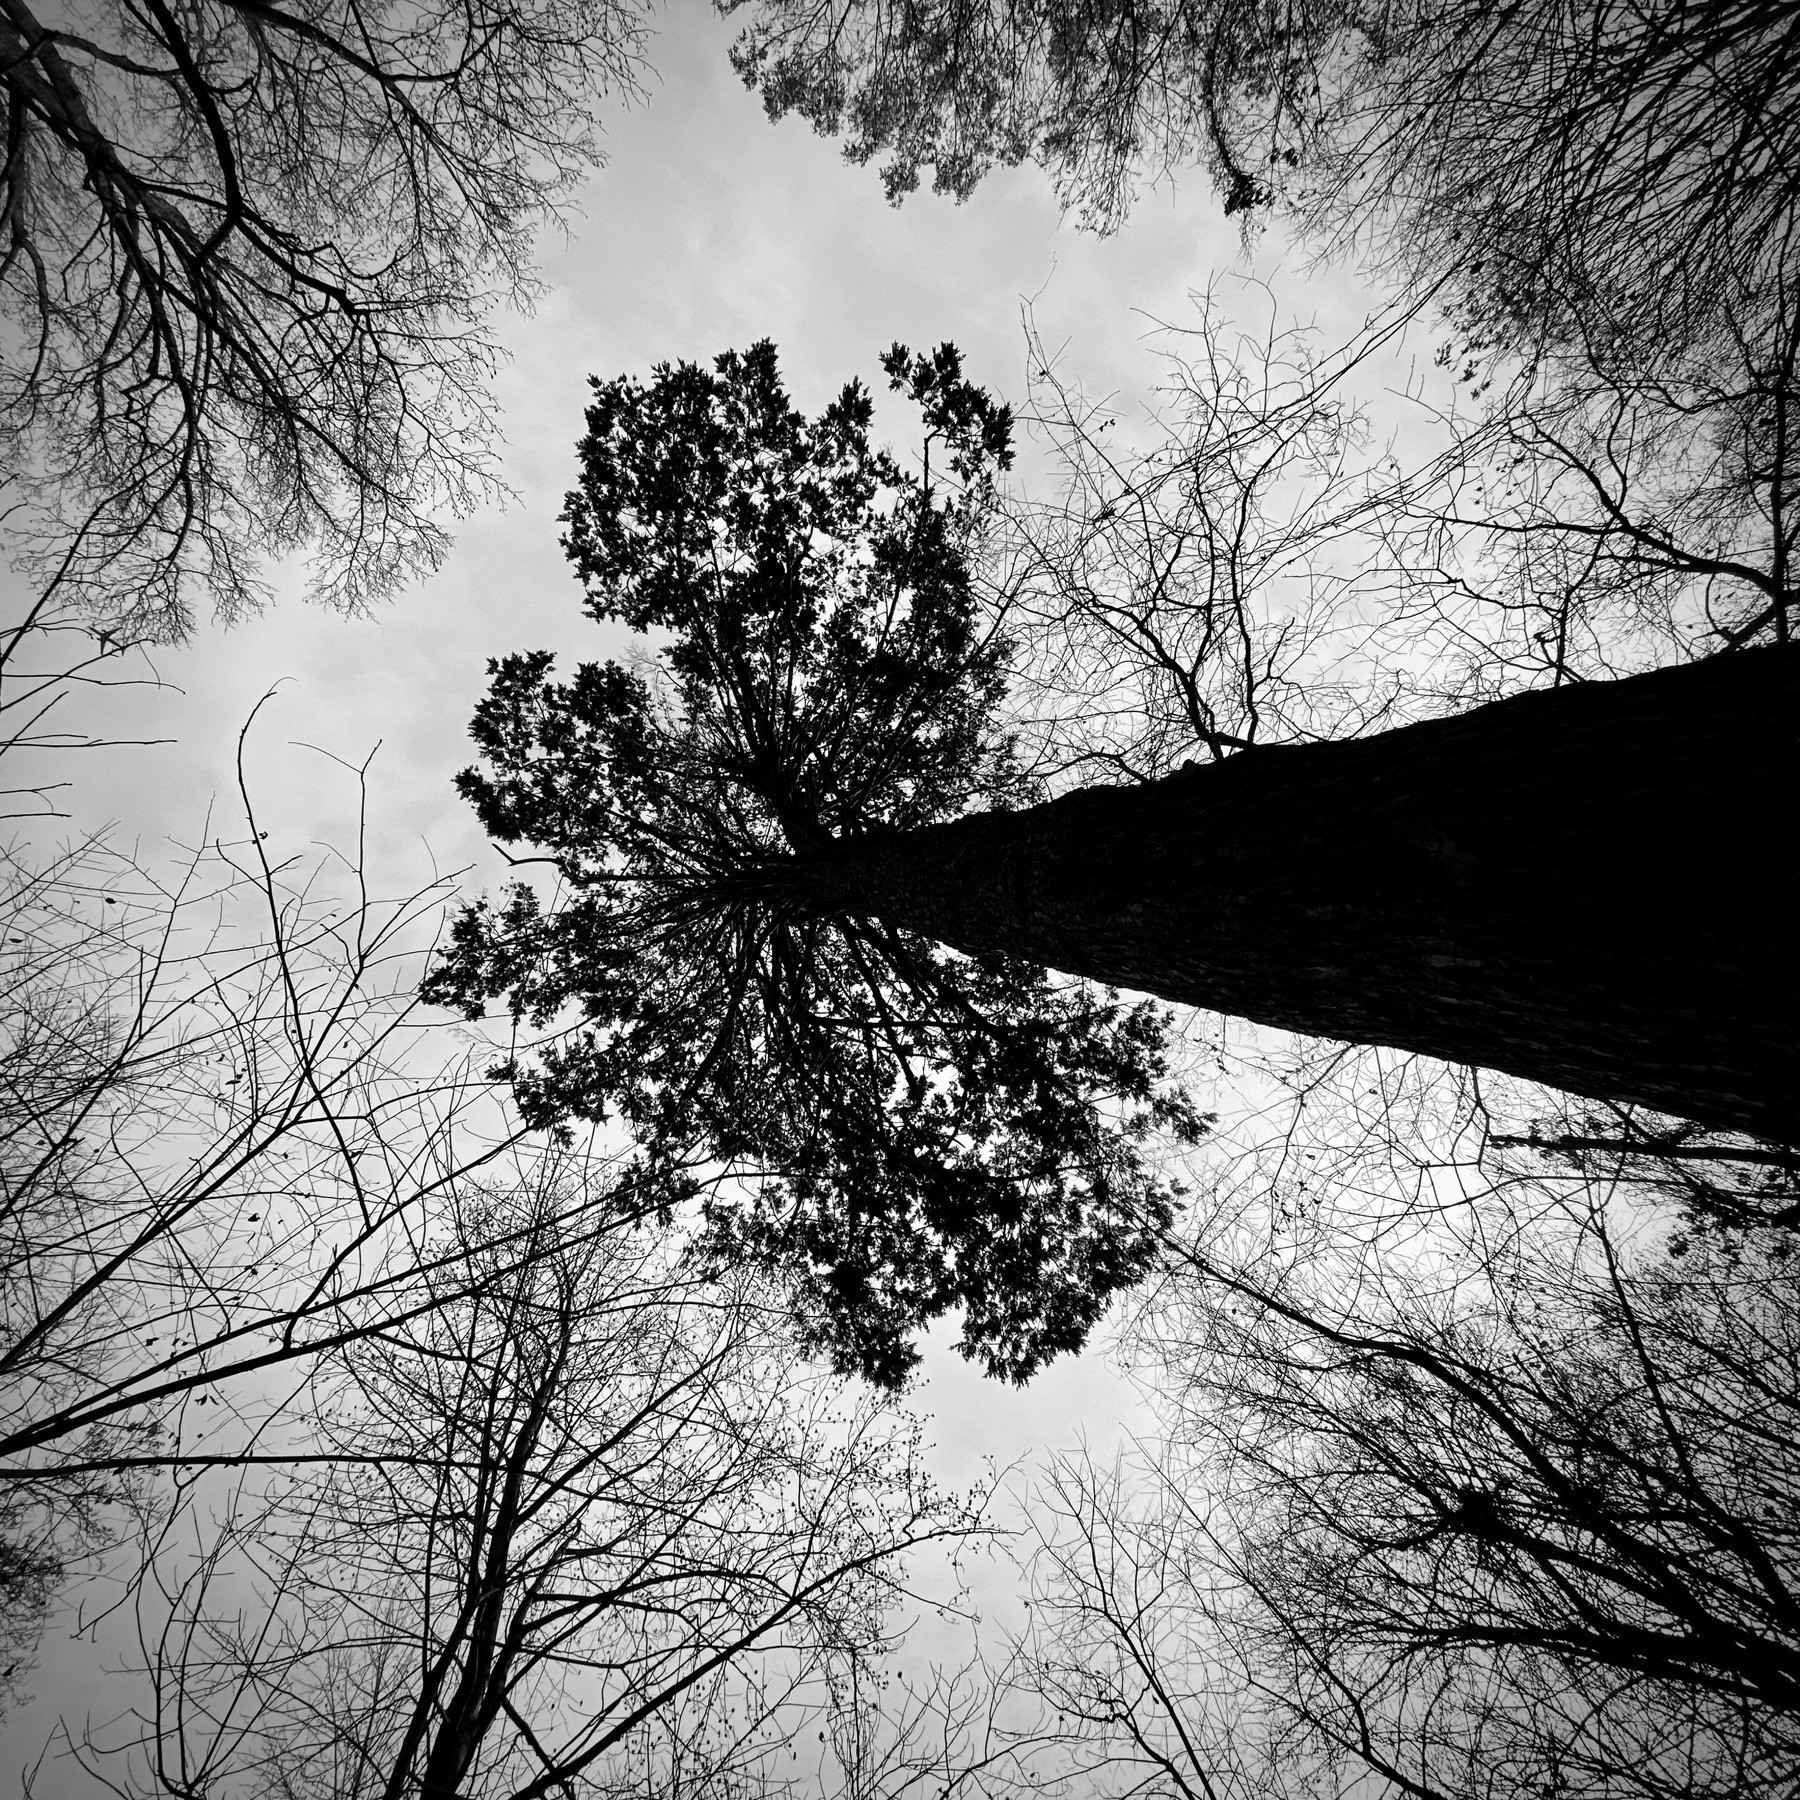 Looking straight up at a Hemlock tree, with grey skies.